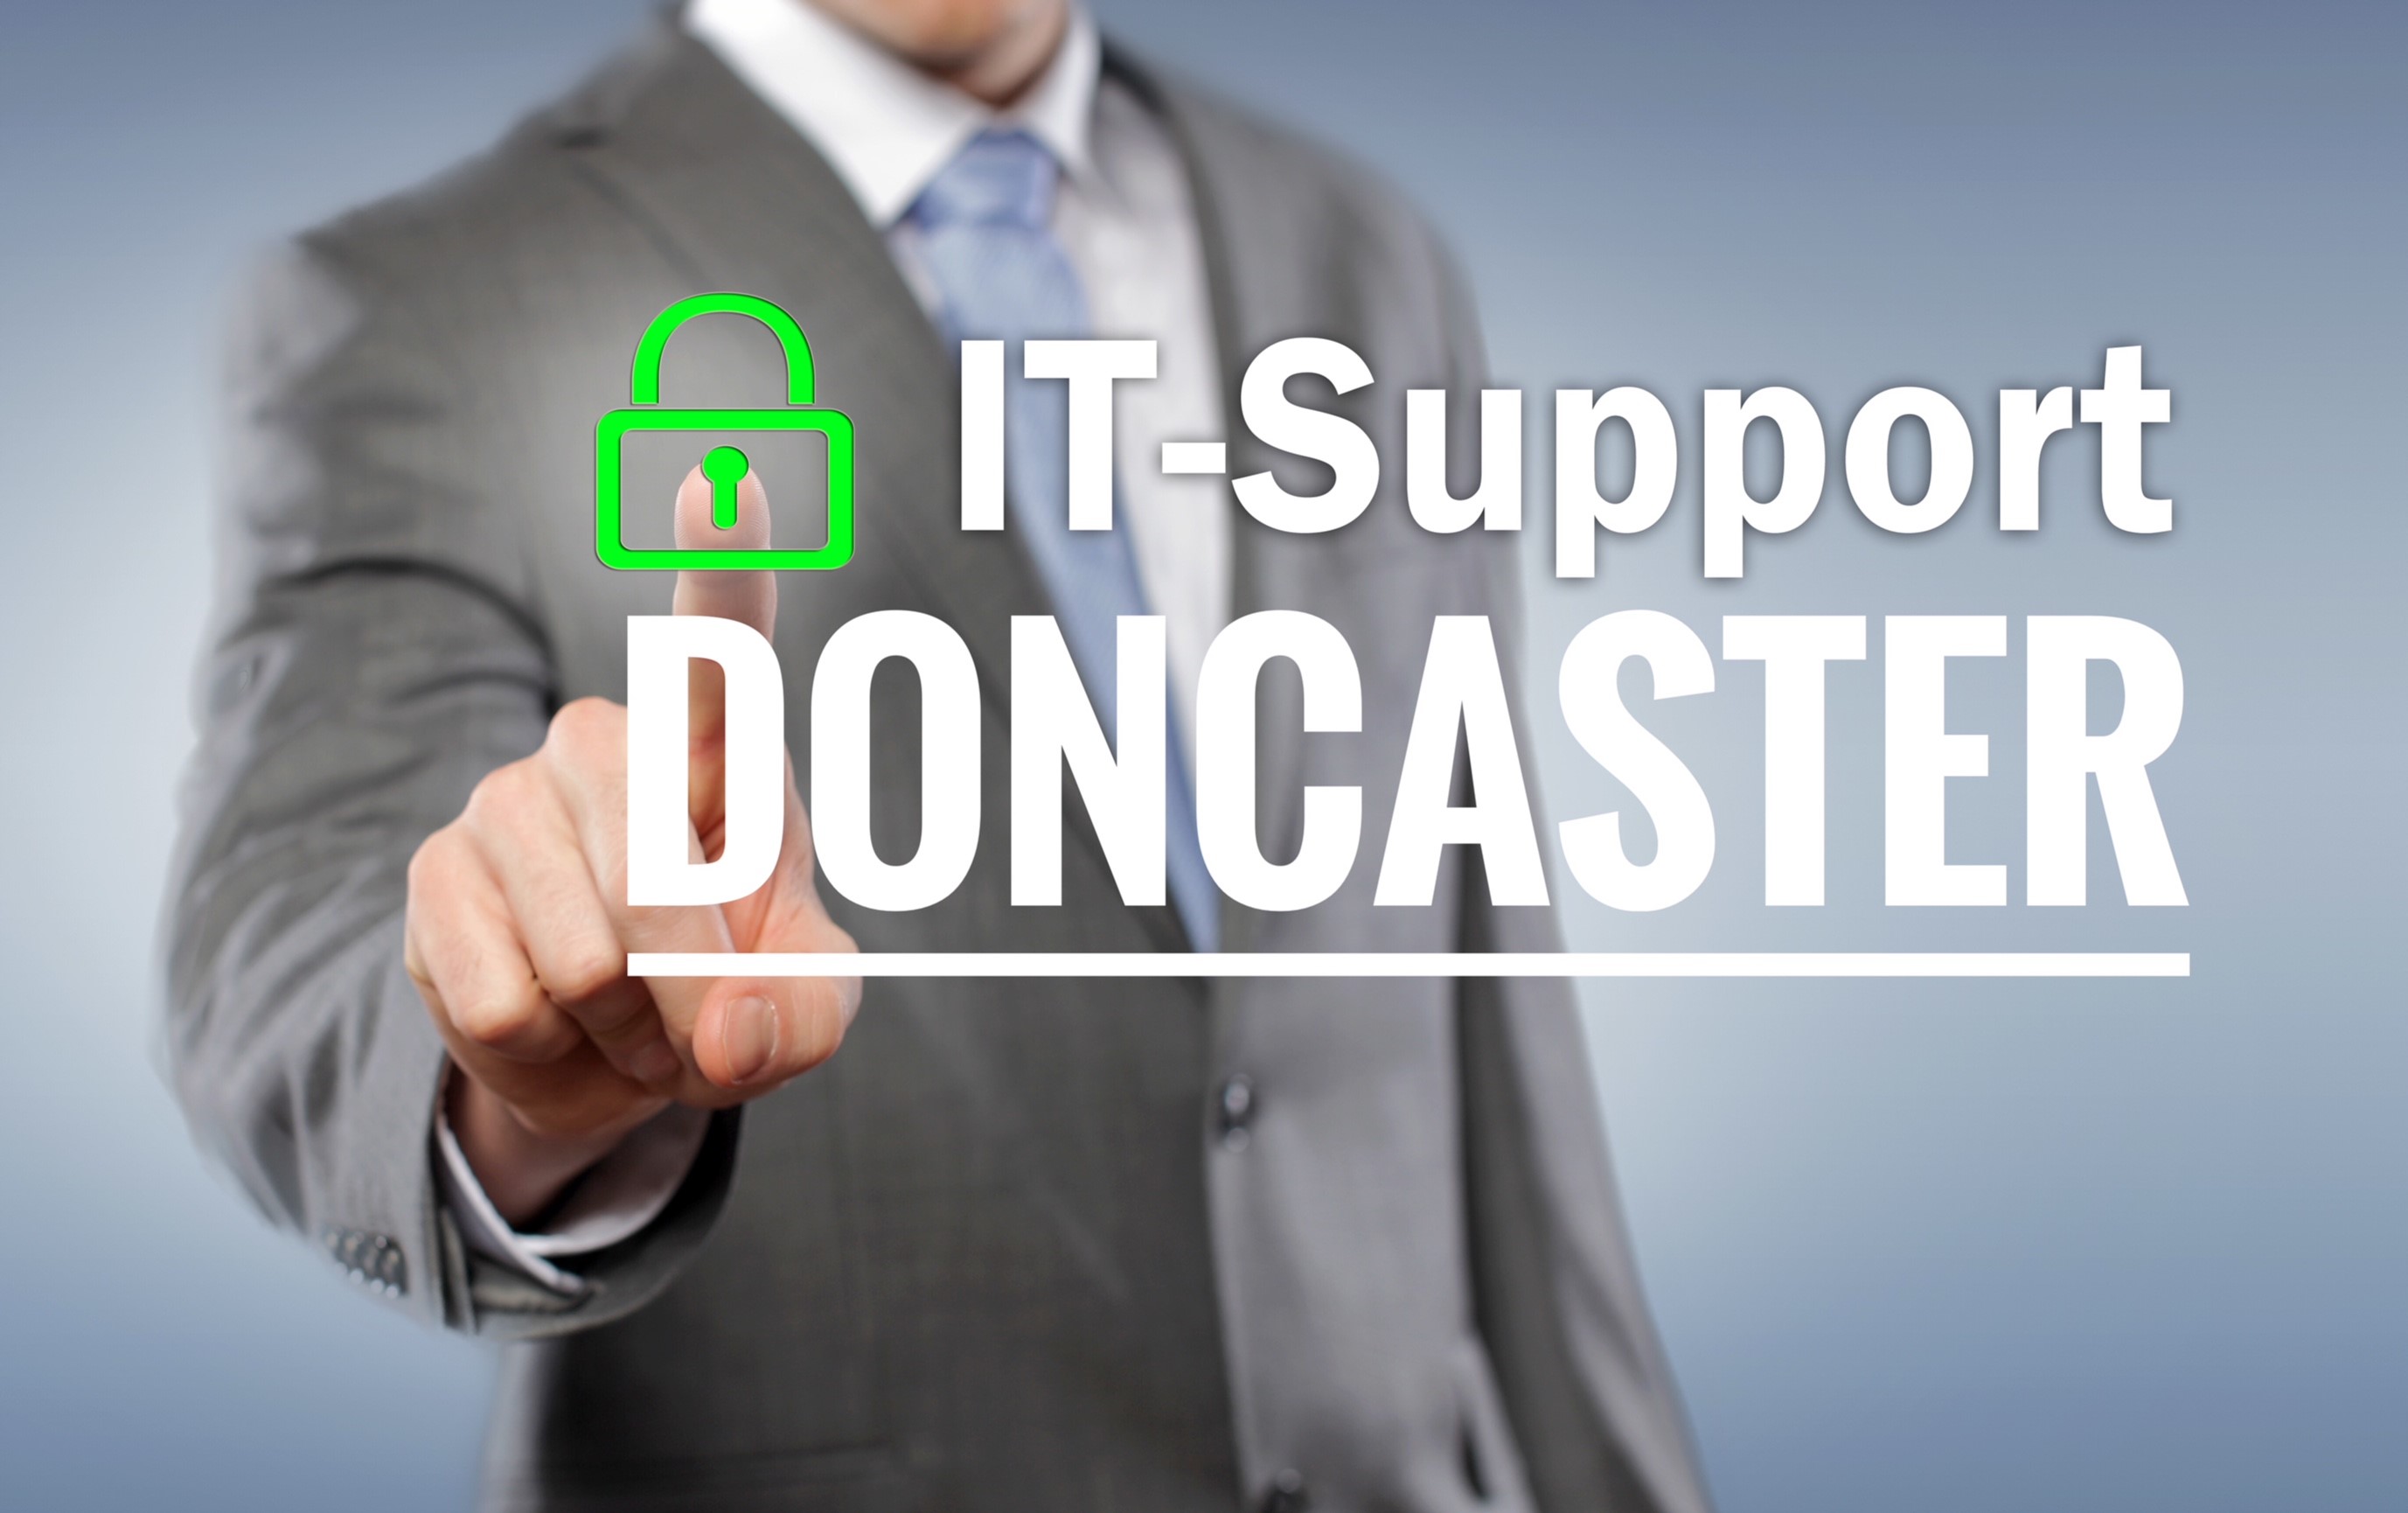 Simply the best IT Support in Doncaster – Guaranteed!